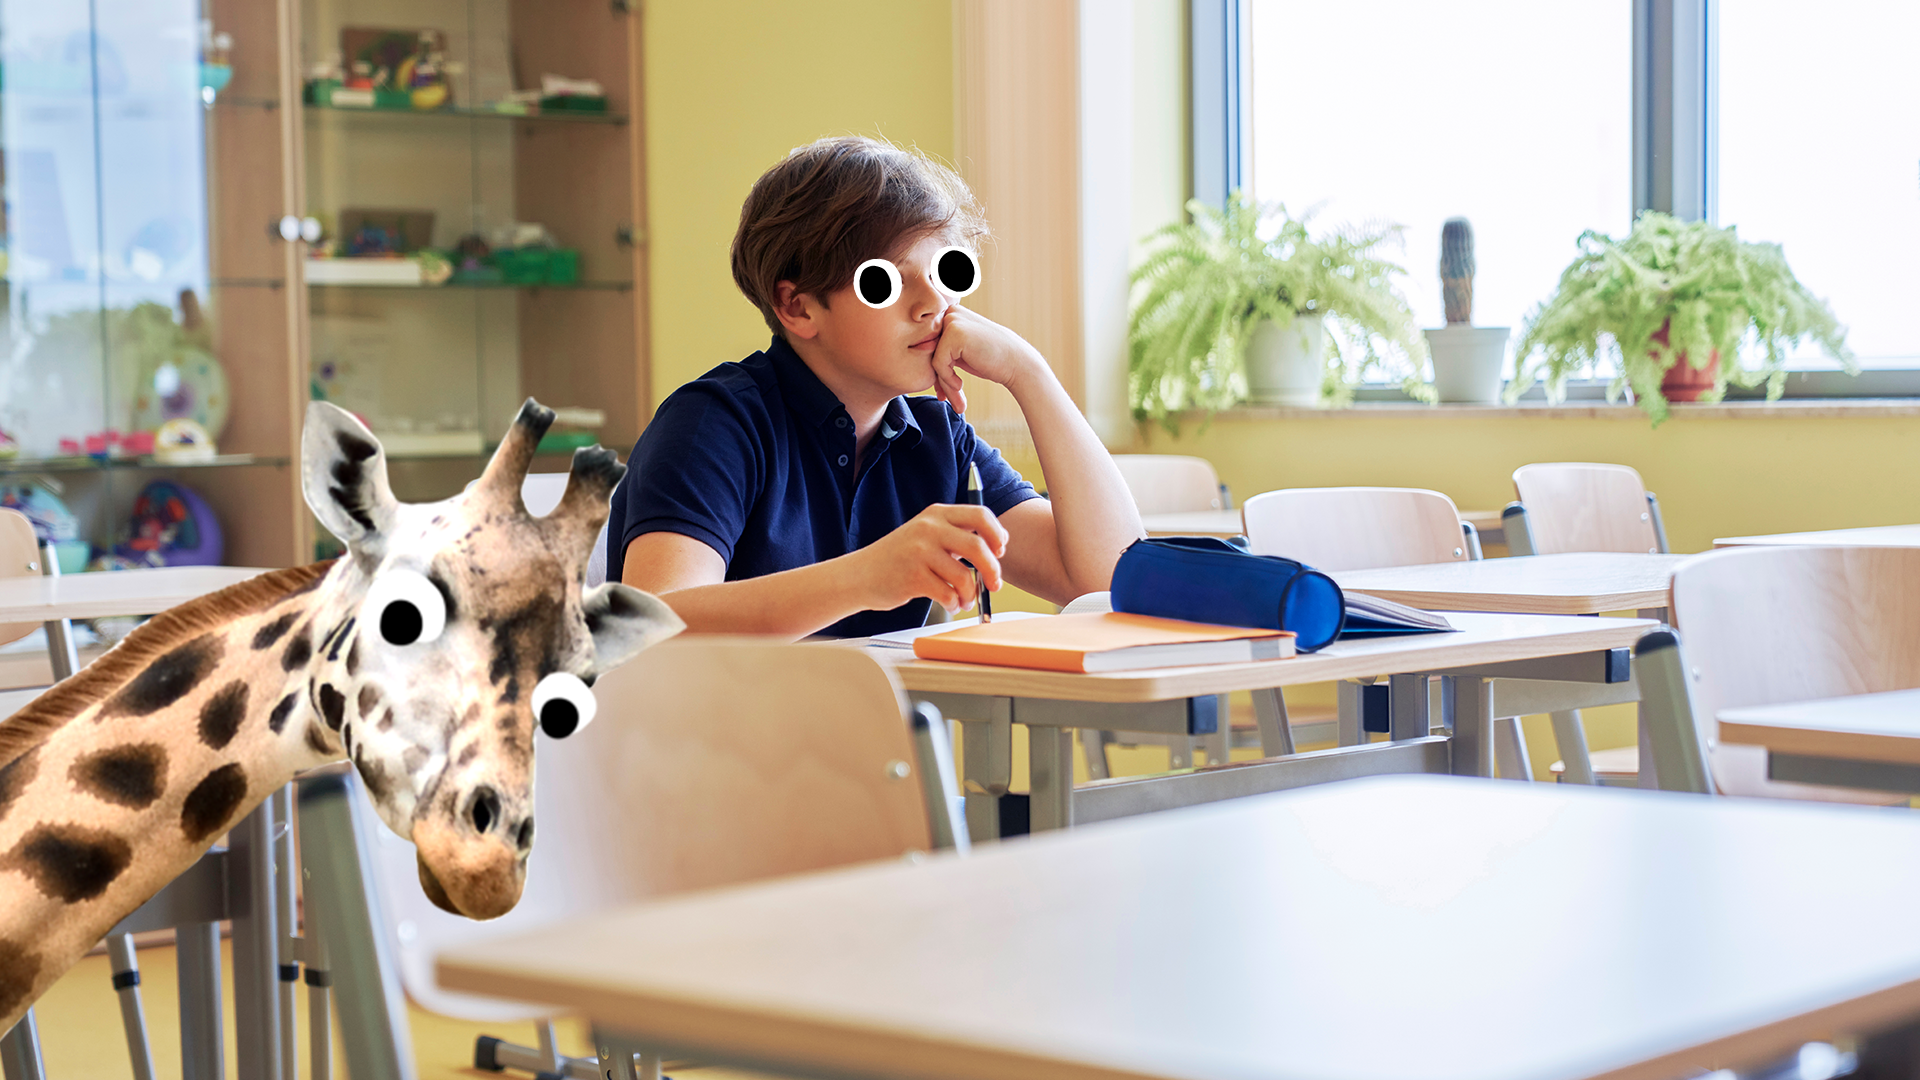 Boy alone in classroom with surprised giraffe 